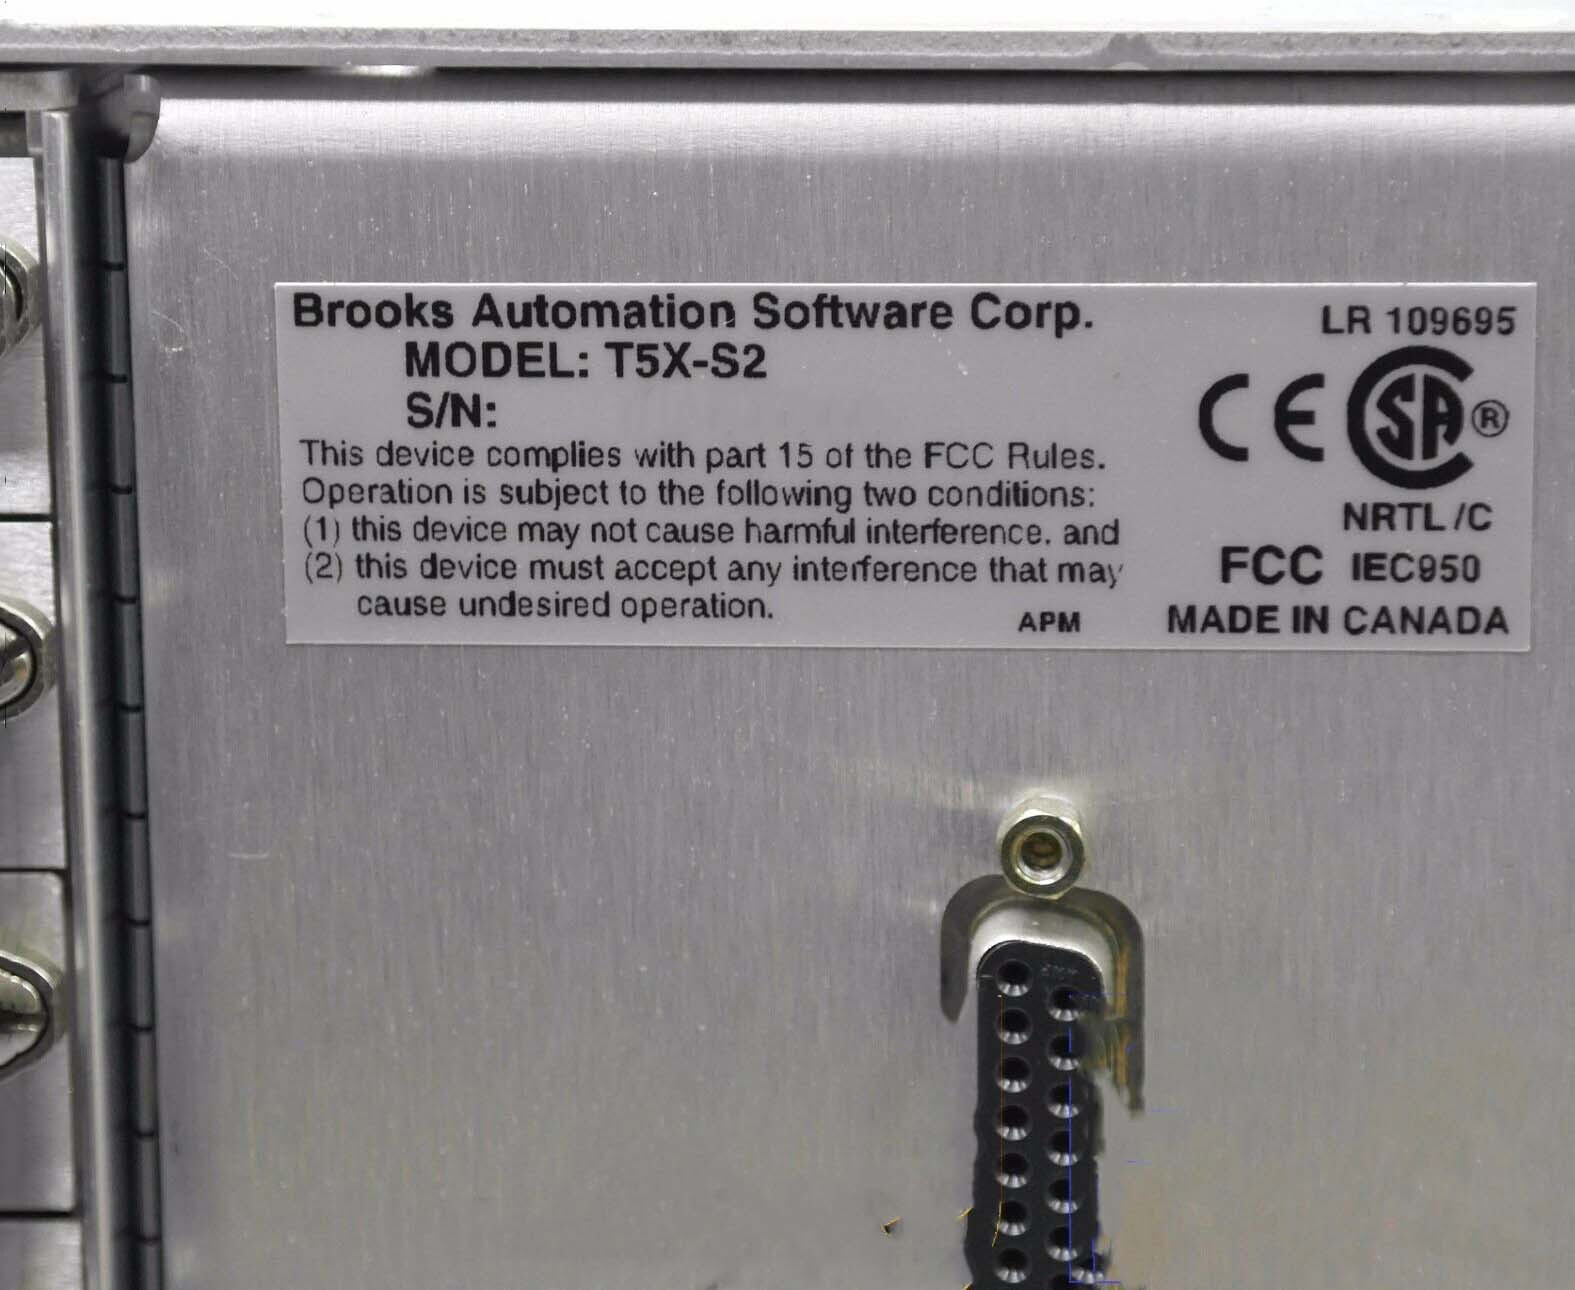 Photo Used BROOKS AUTOMATION Techware 5 Express For Sale